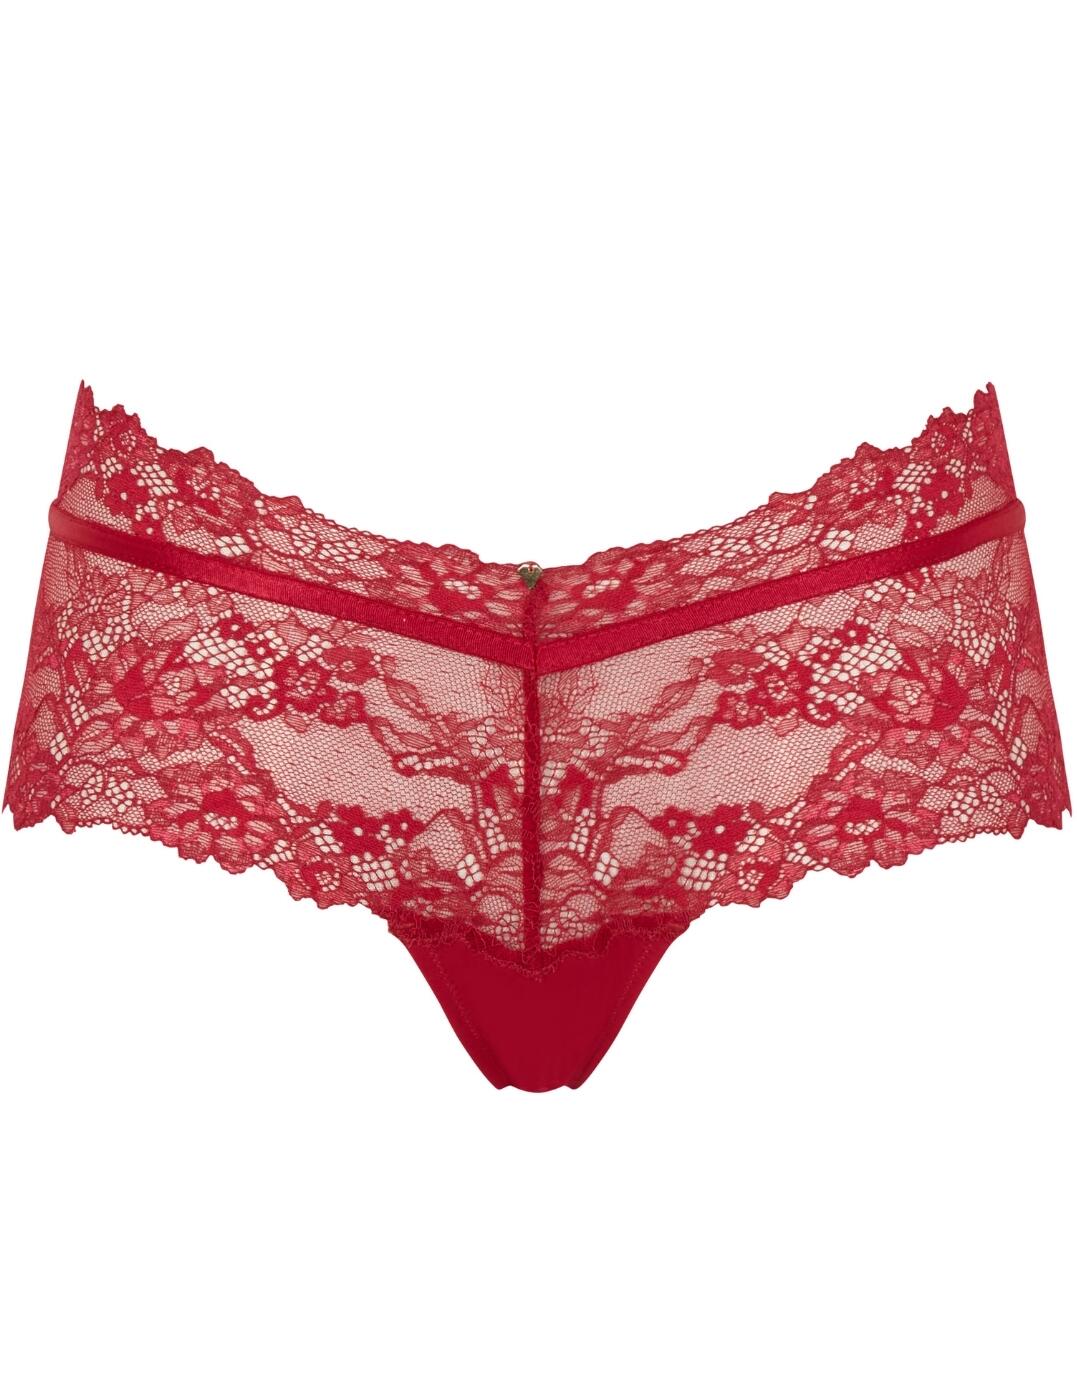 Cleo By Panache Selena Hipster Brief - Belle Lingerie